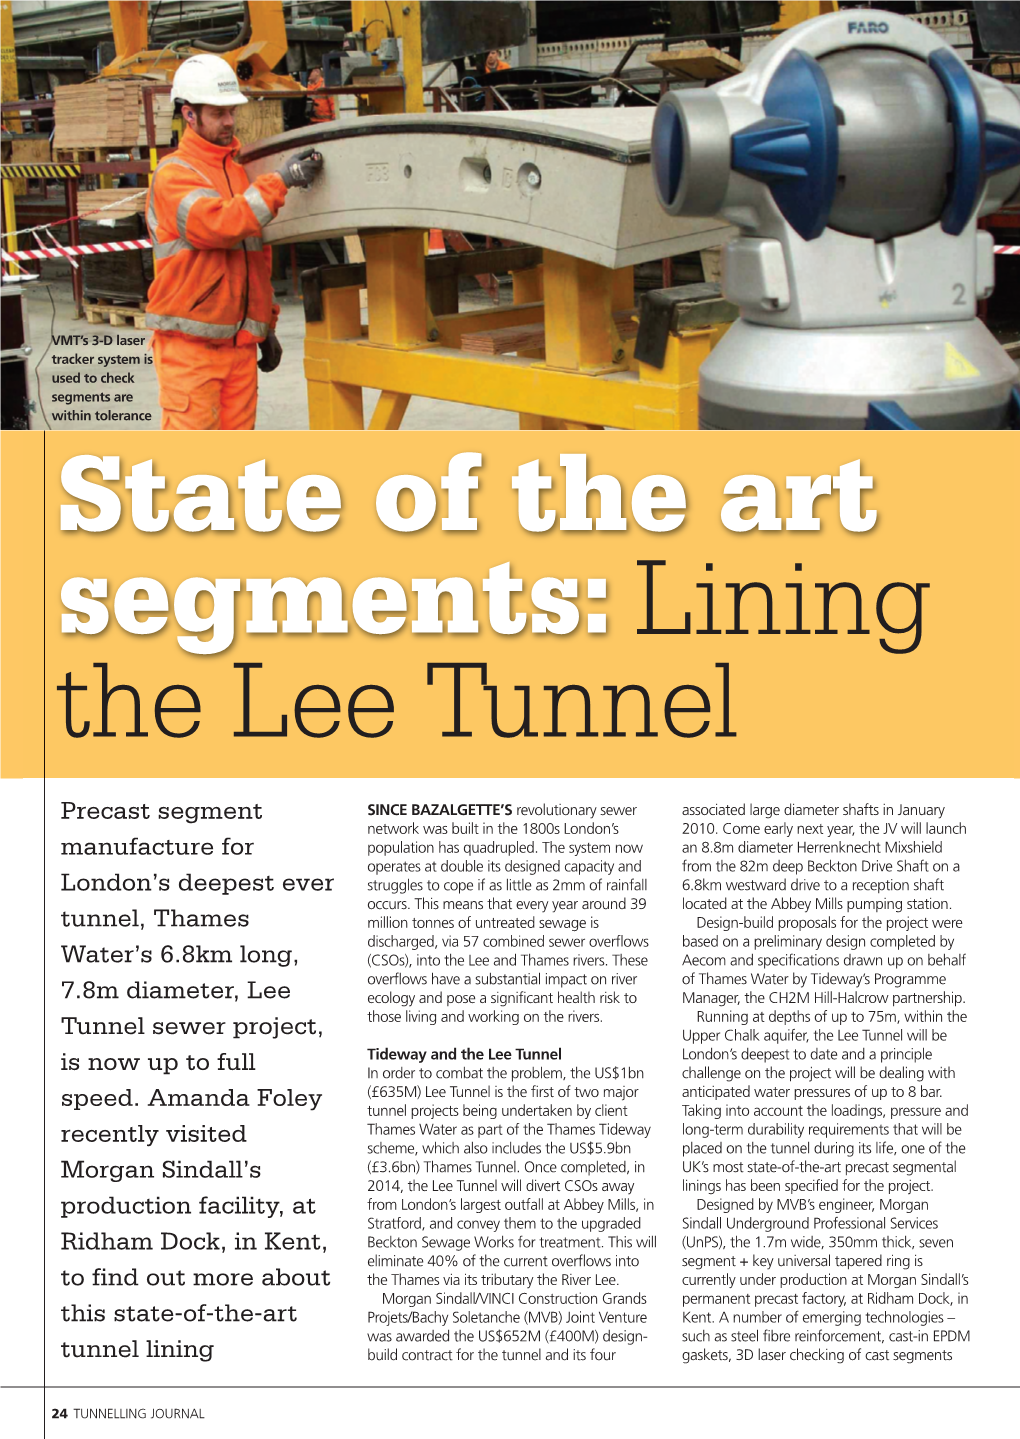 State of the Art Segments: Lining the Lee Tunnel